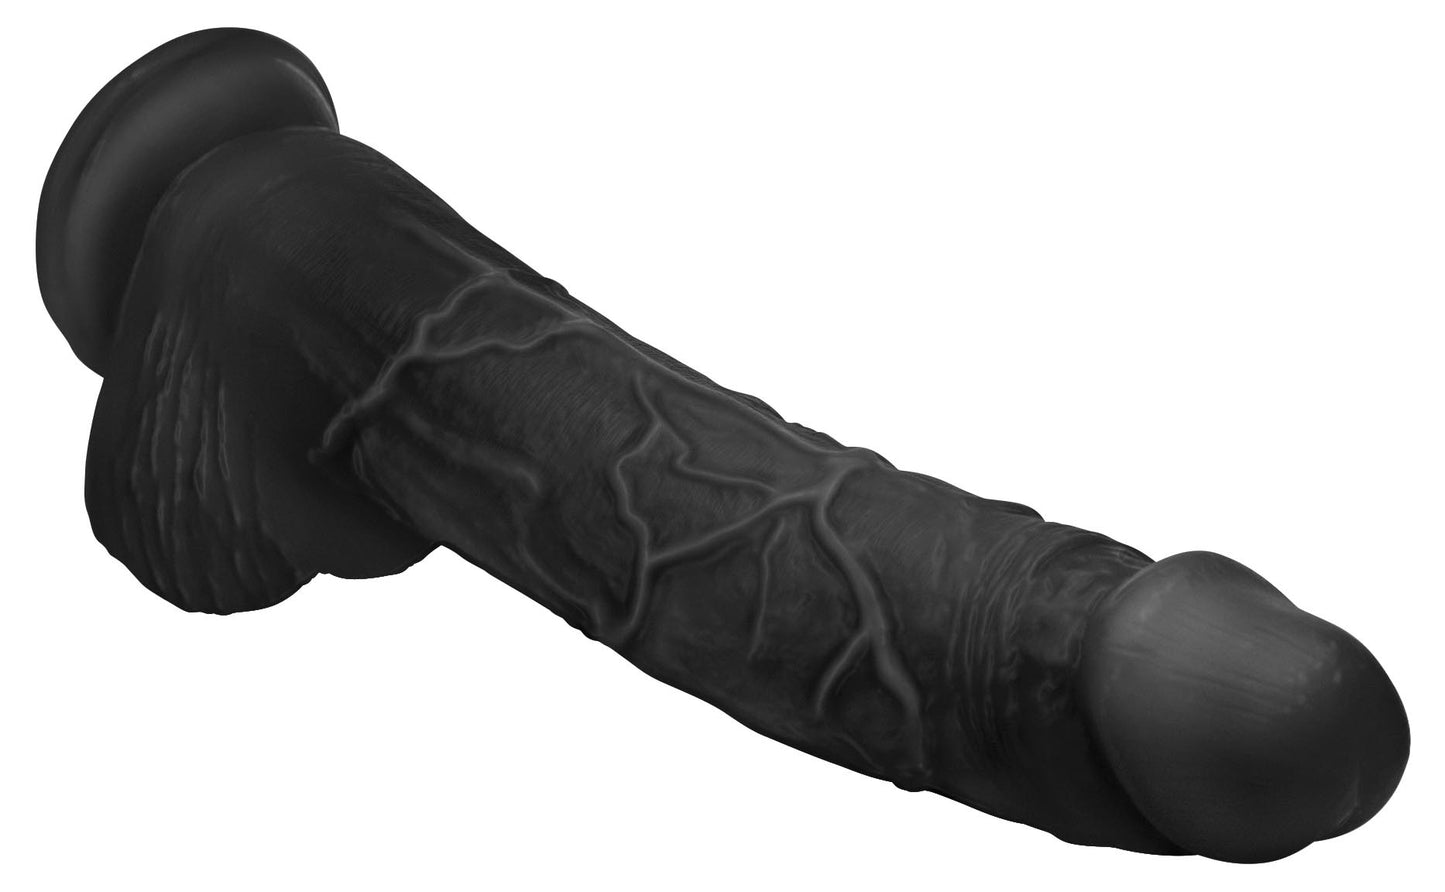 Hung Harry 11.75 Inch Dildo With Balls - Black